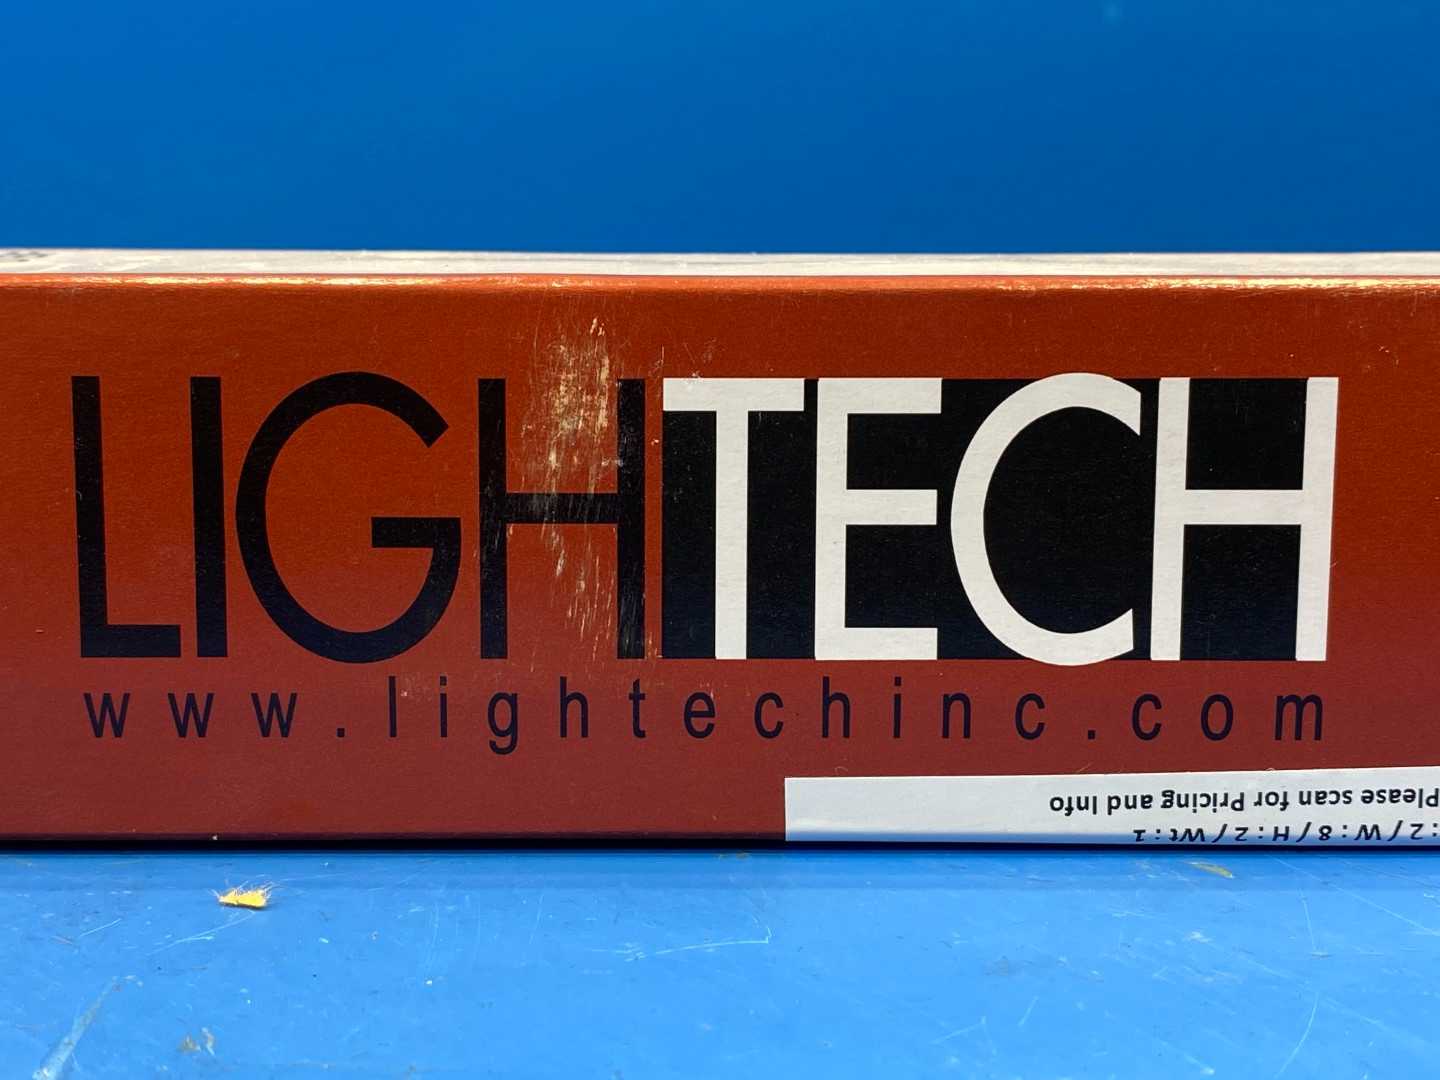 Lightech Dimmable LED Driver LED-36-700-120-D-BF   66899